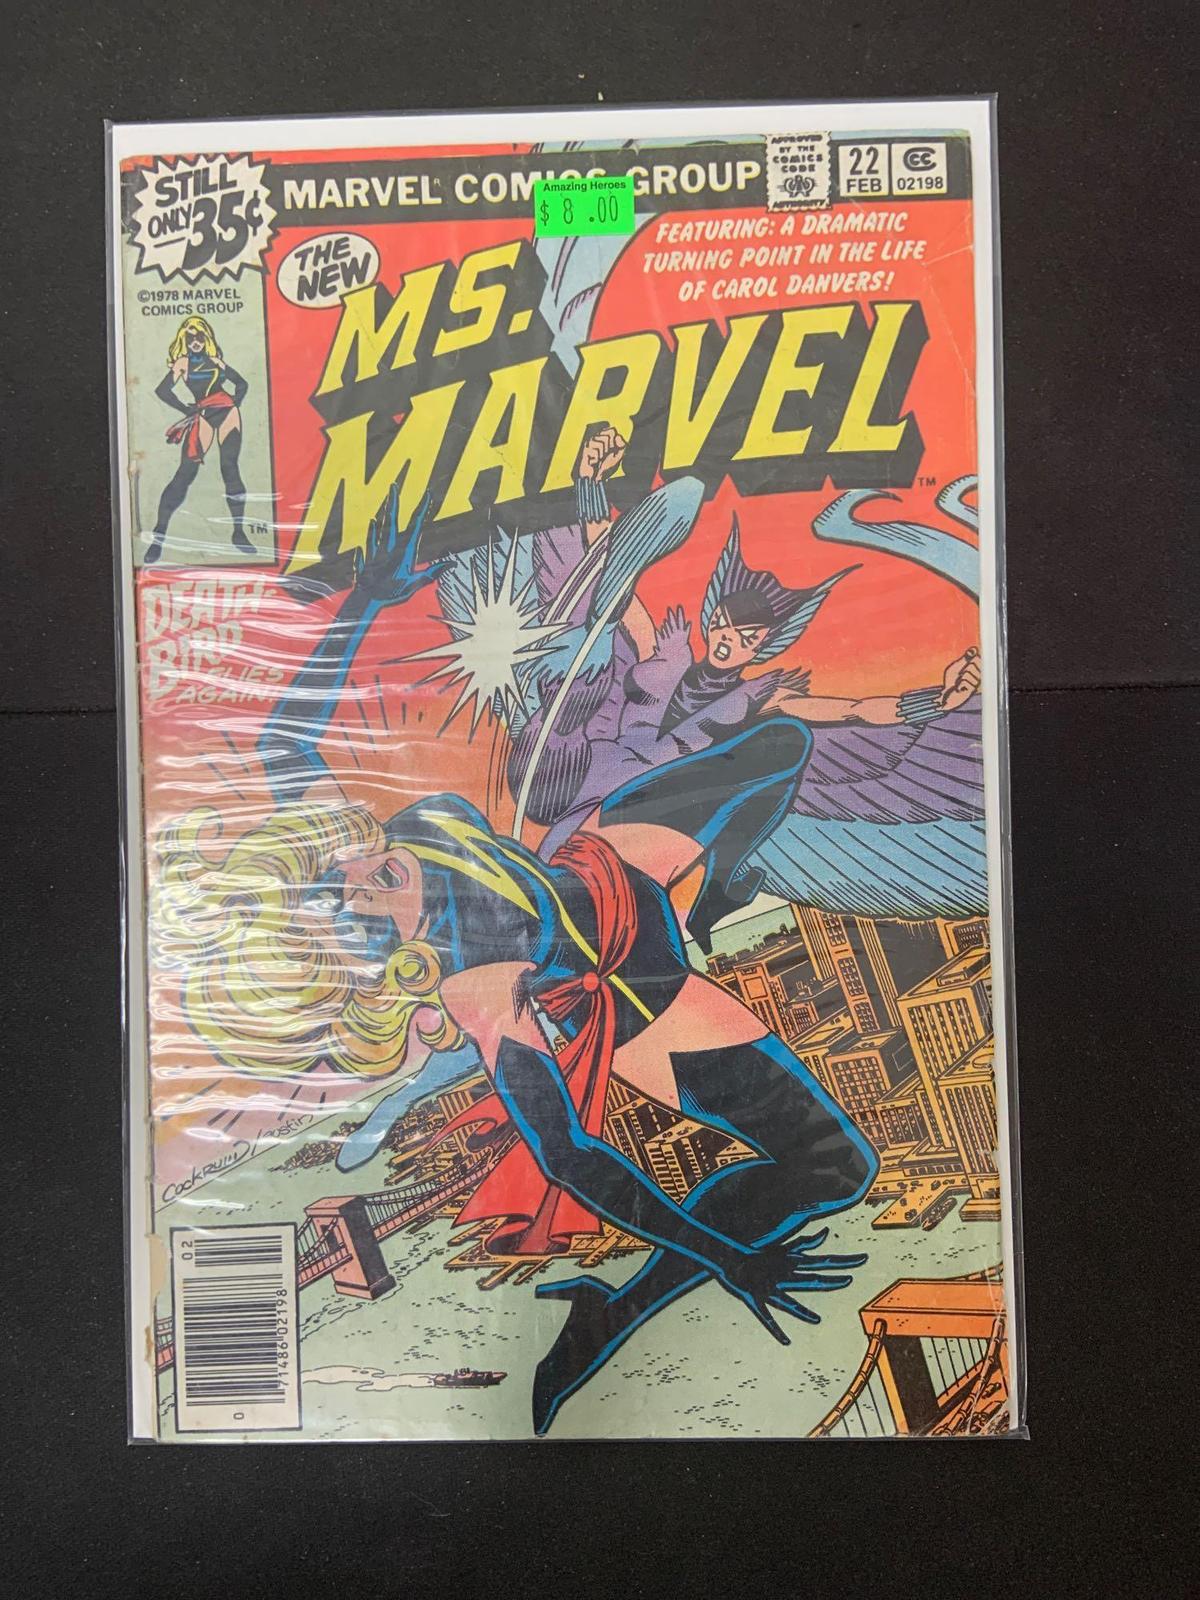 Ms. Marvel #22 Comic Book from Amazing Collection